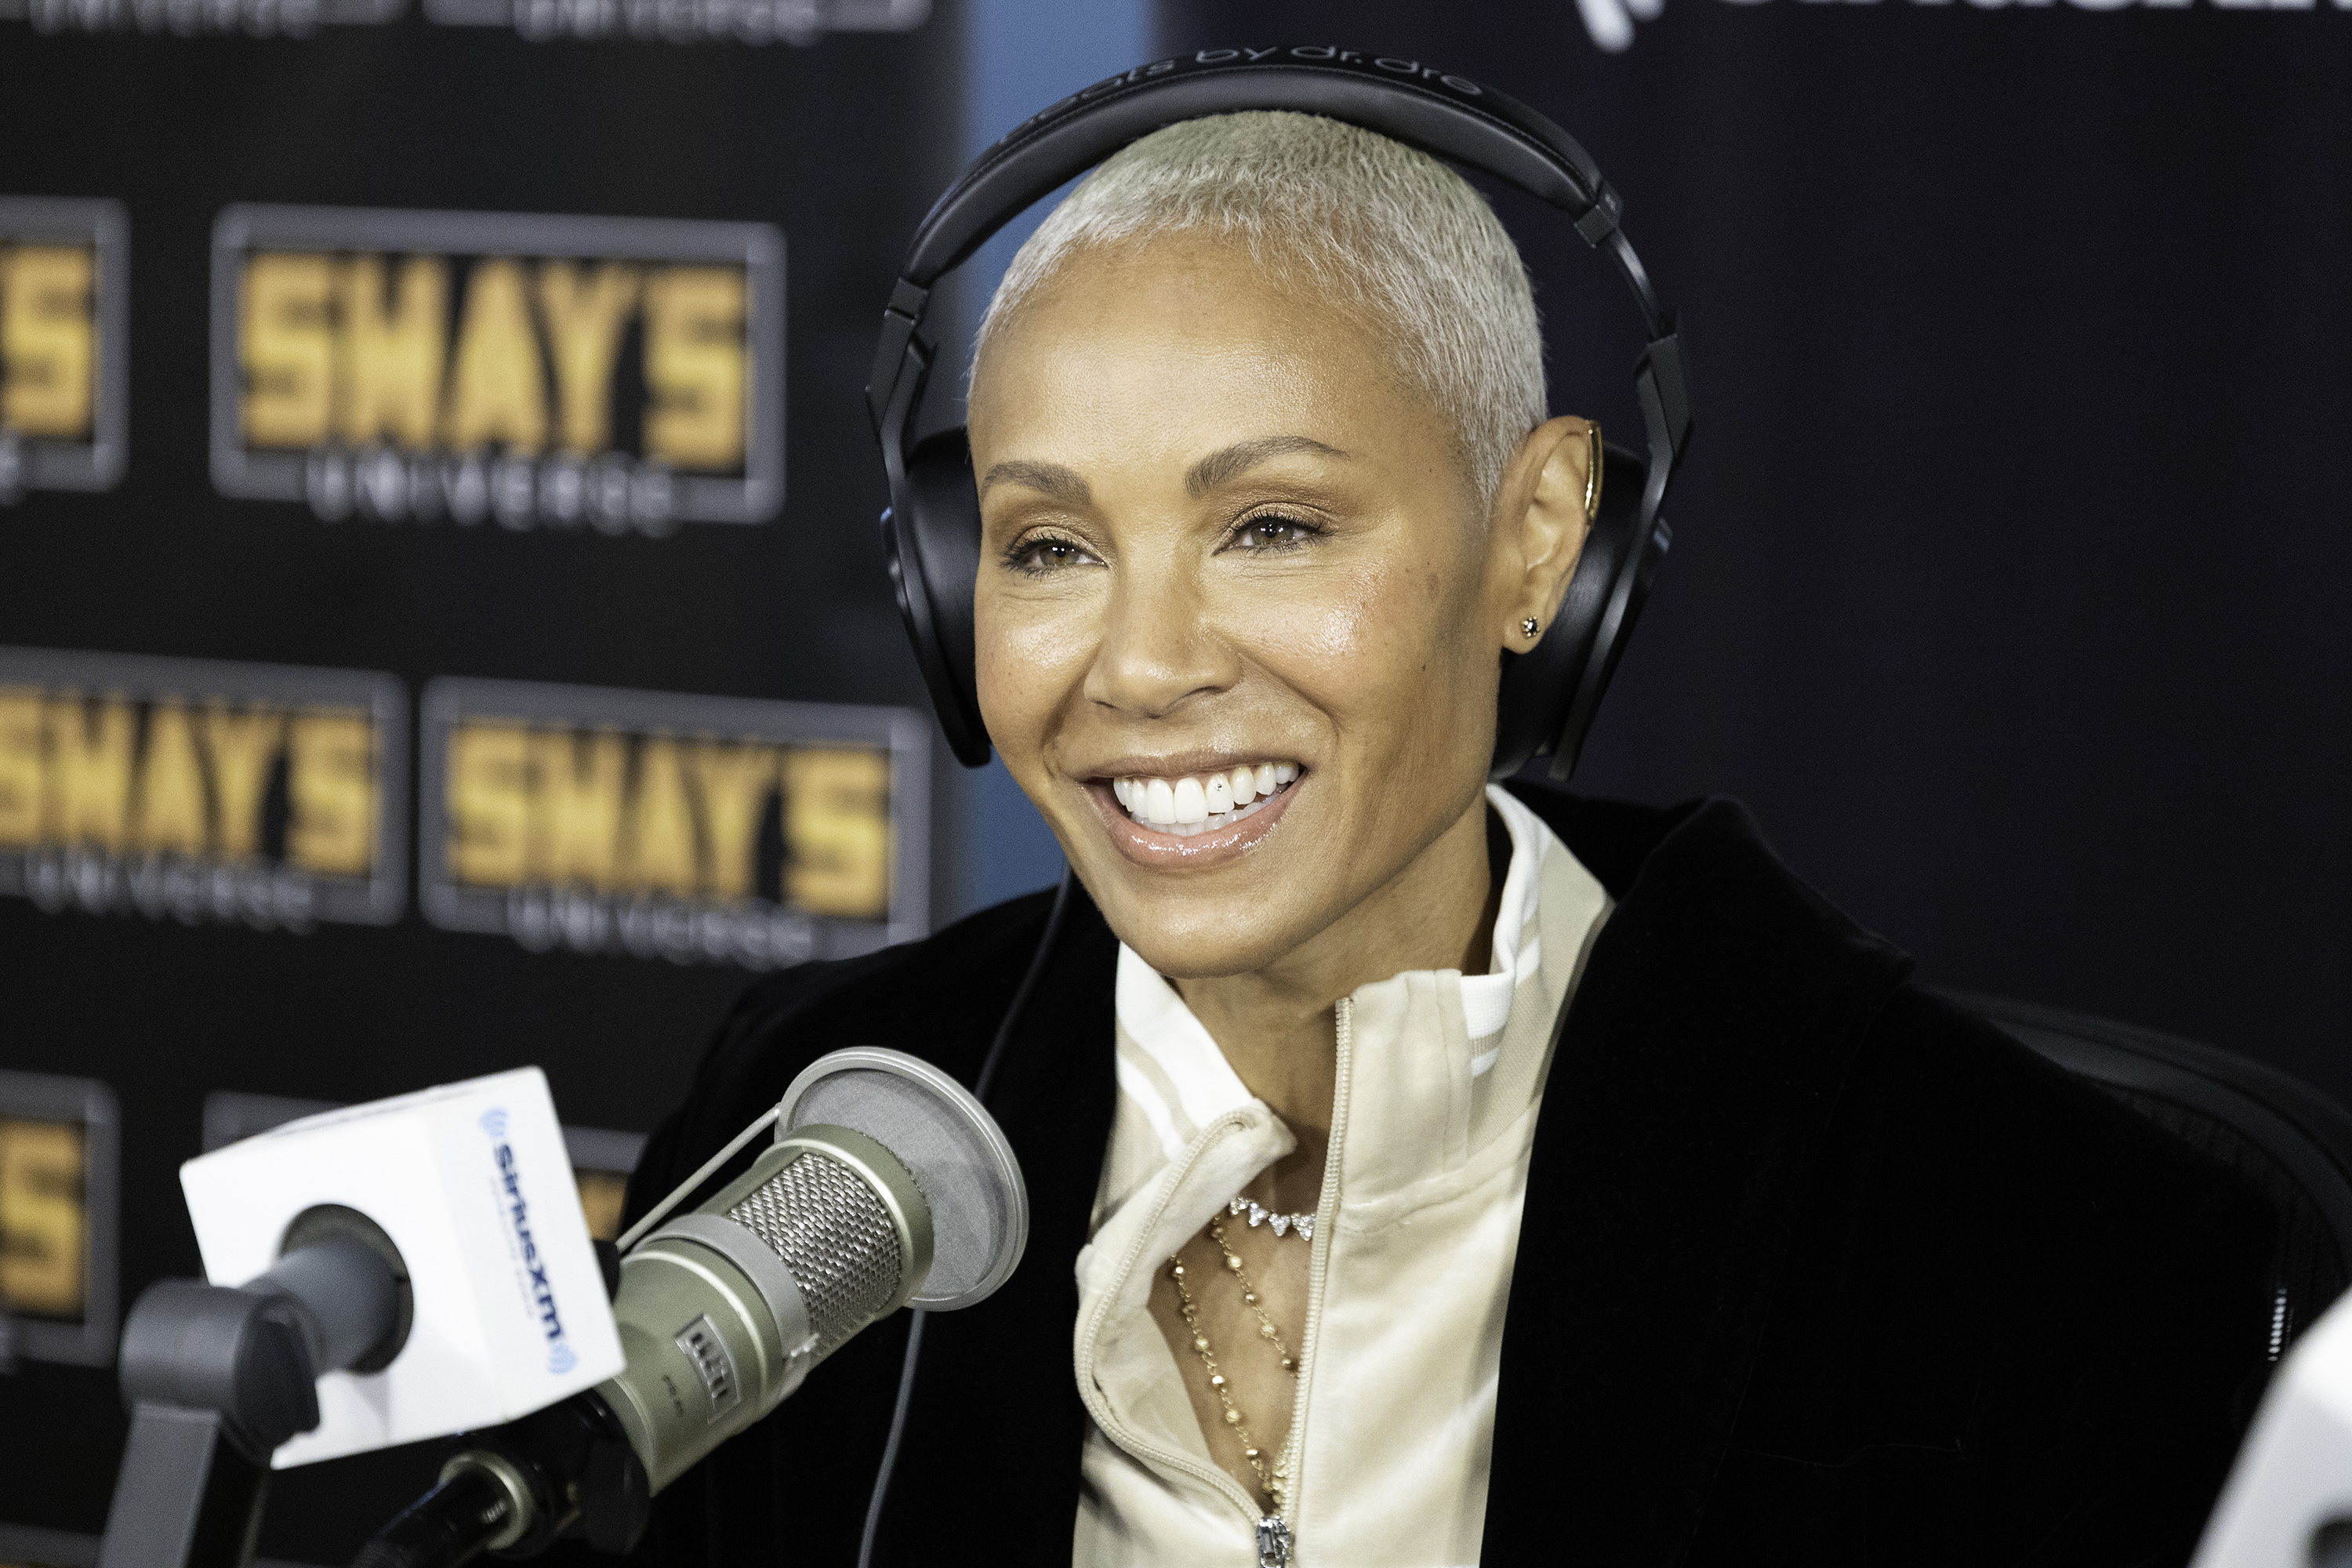 Jada Pinkett Smith during a visit at SiriusXM studios in New York City on October 17, 2023 | Source: Getty Images